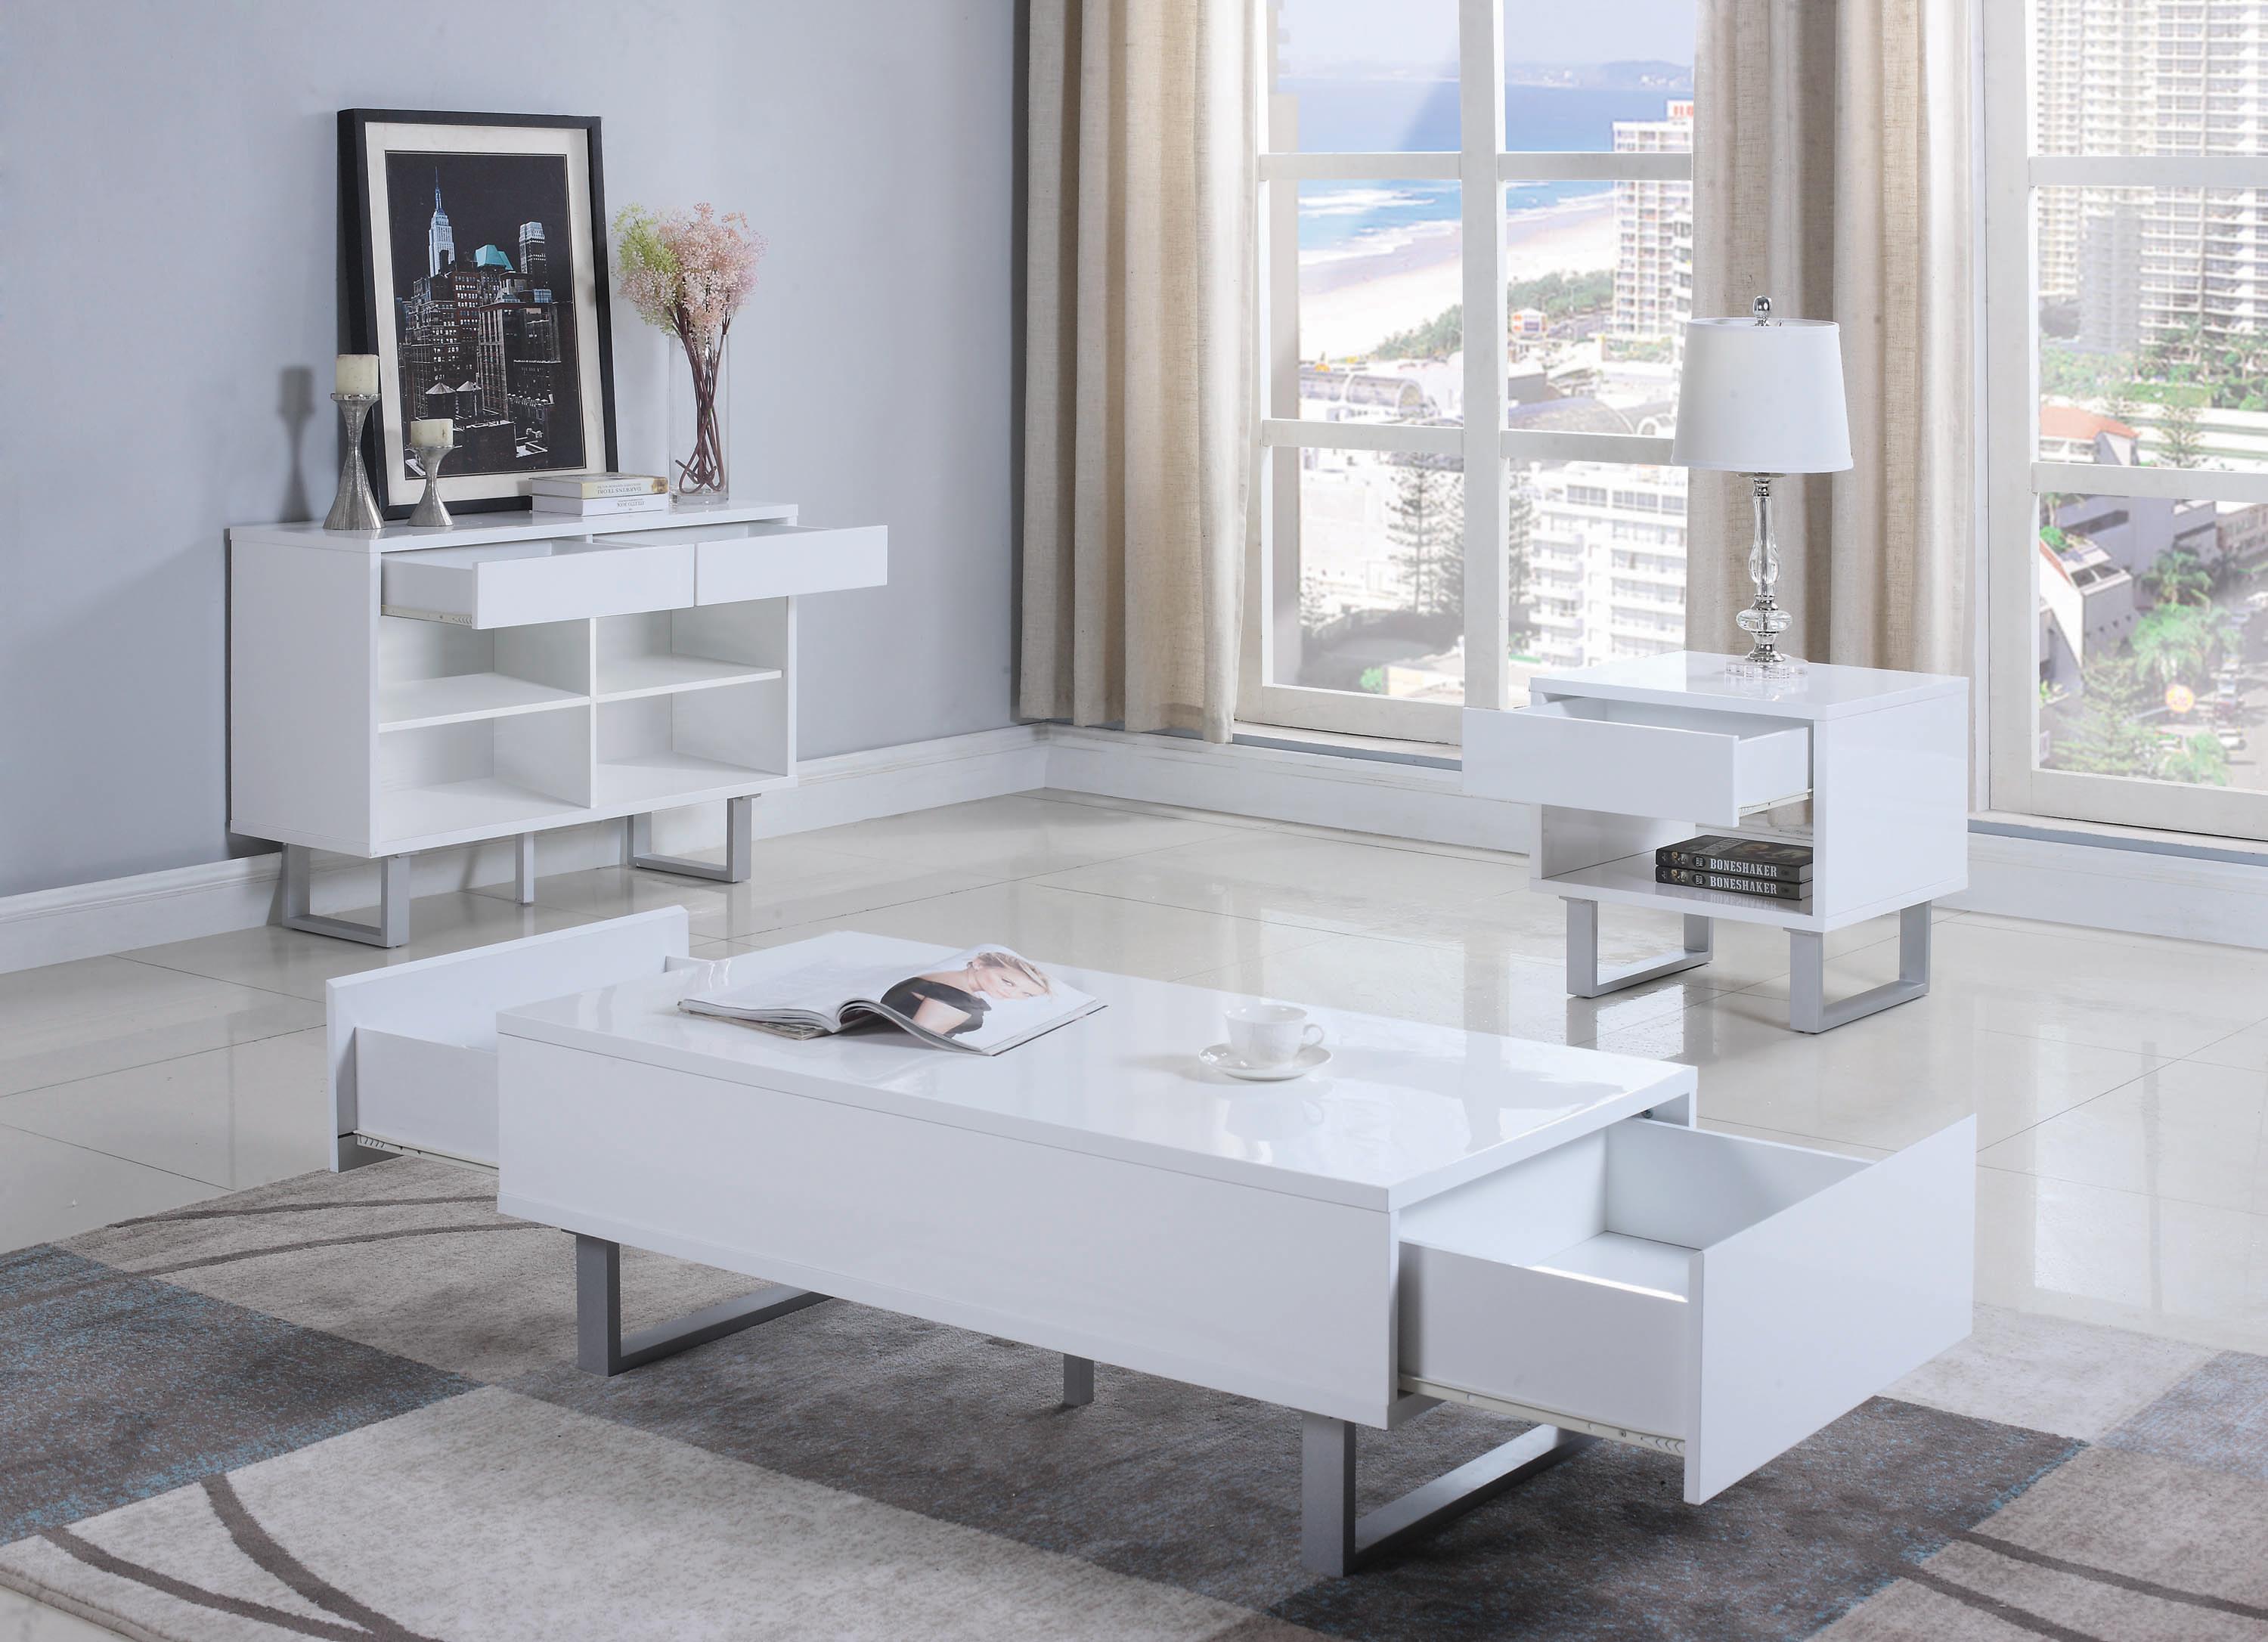 Contemporary Coffee Table Set 705698-S2 705698-S2 in White 